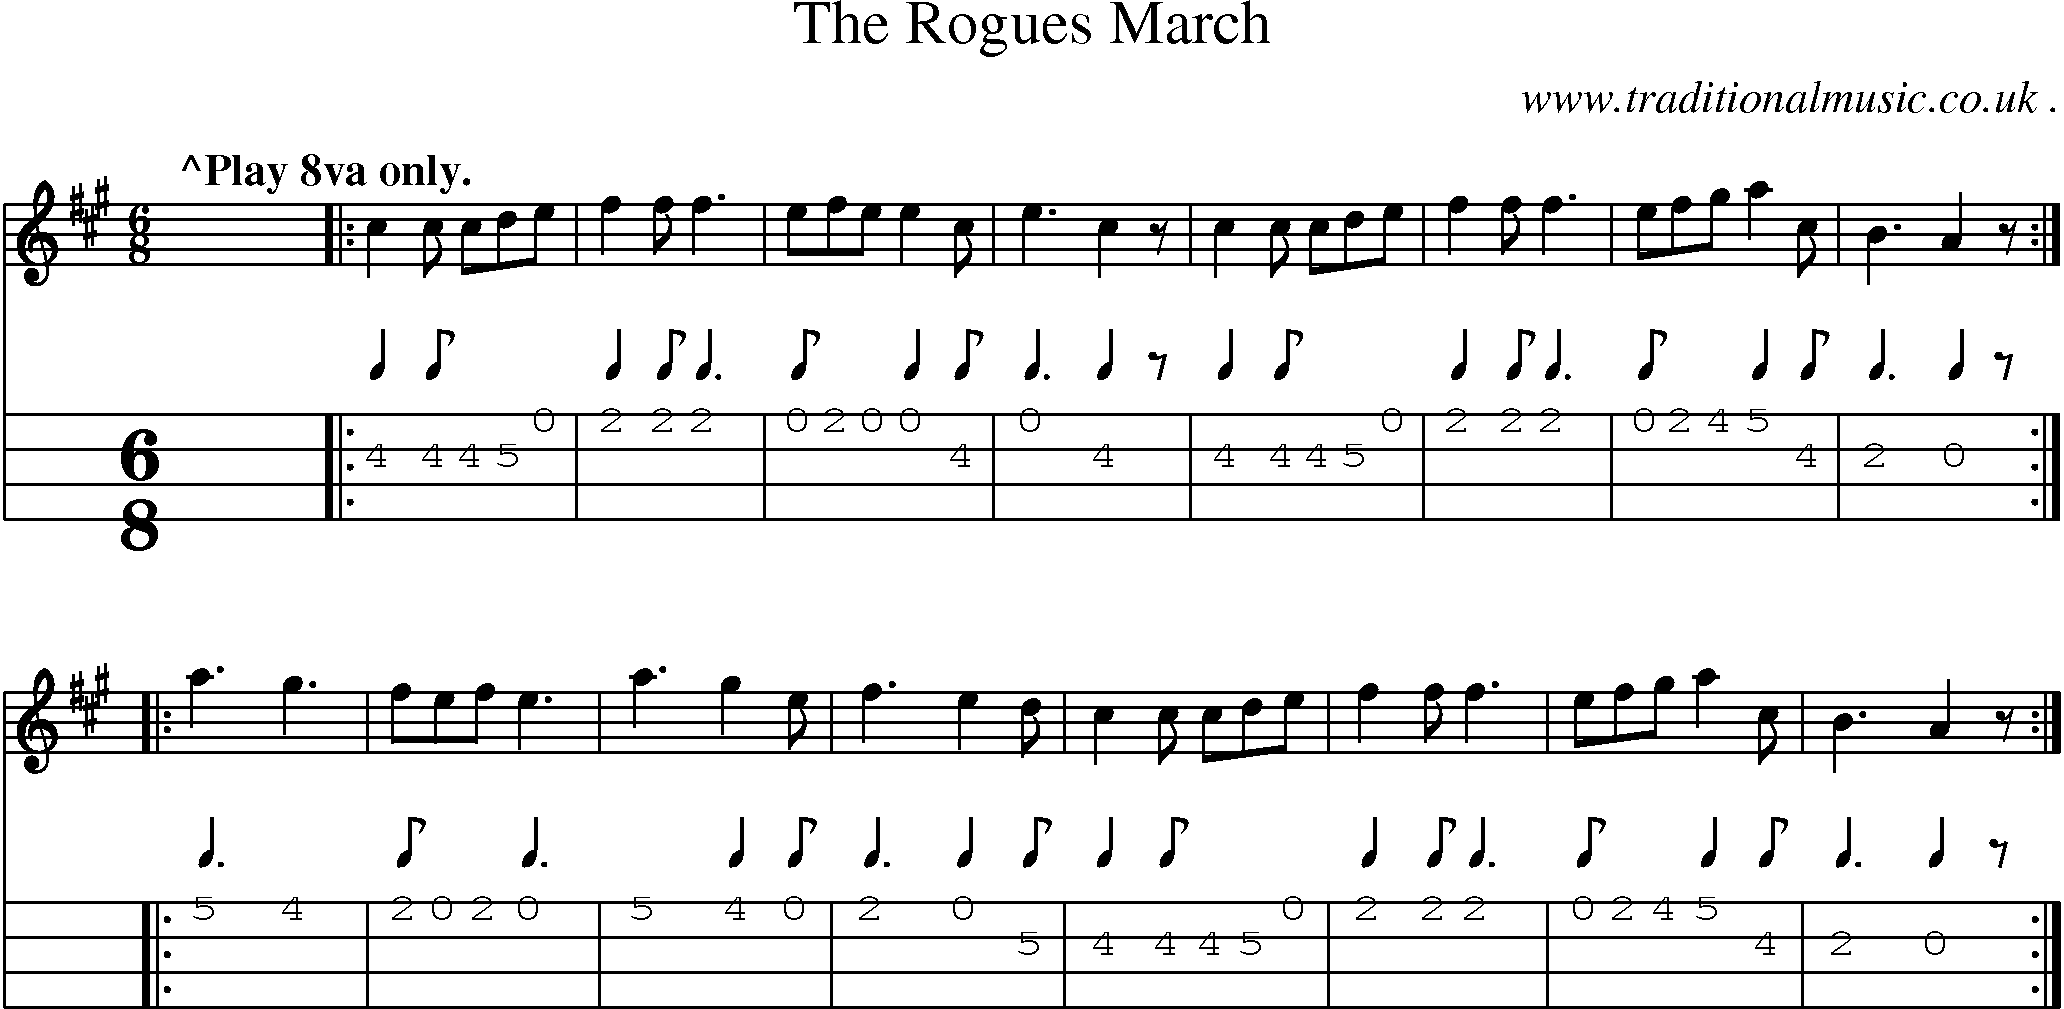 Sheet-music  score, Chords and Mandolin Tabs for The Rogues March